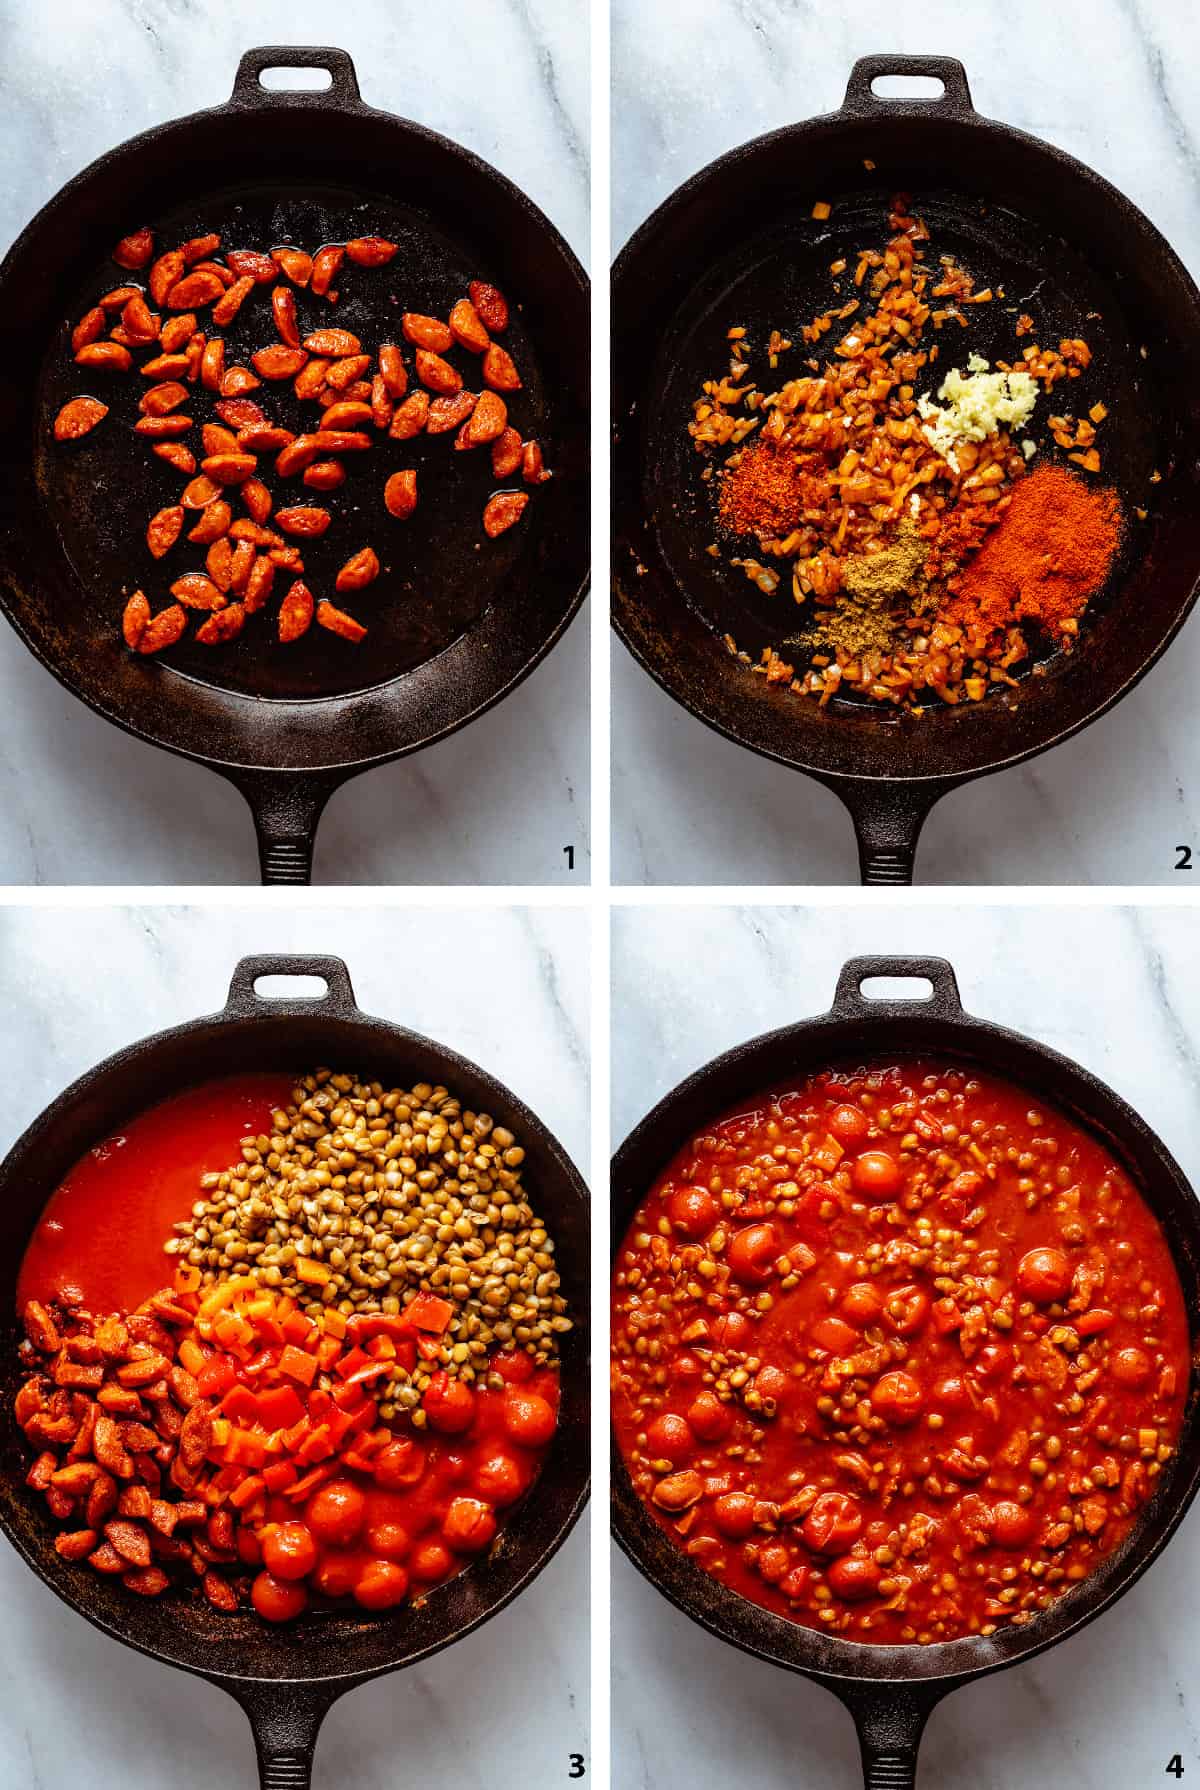 Process of creating the tomato, chorizo and lentil sauce for the shakshuka.